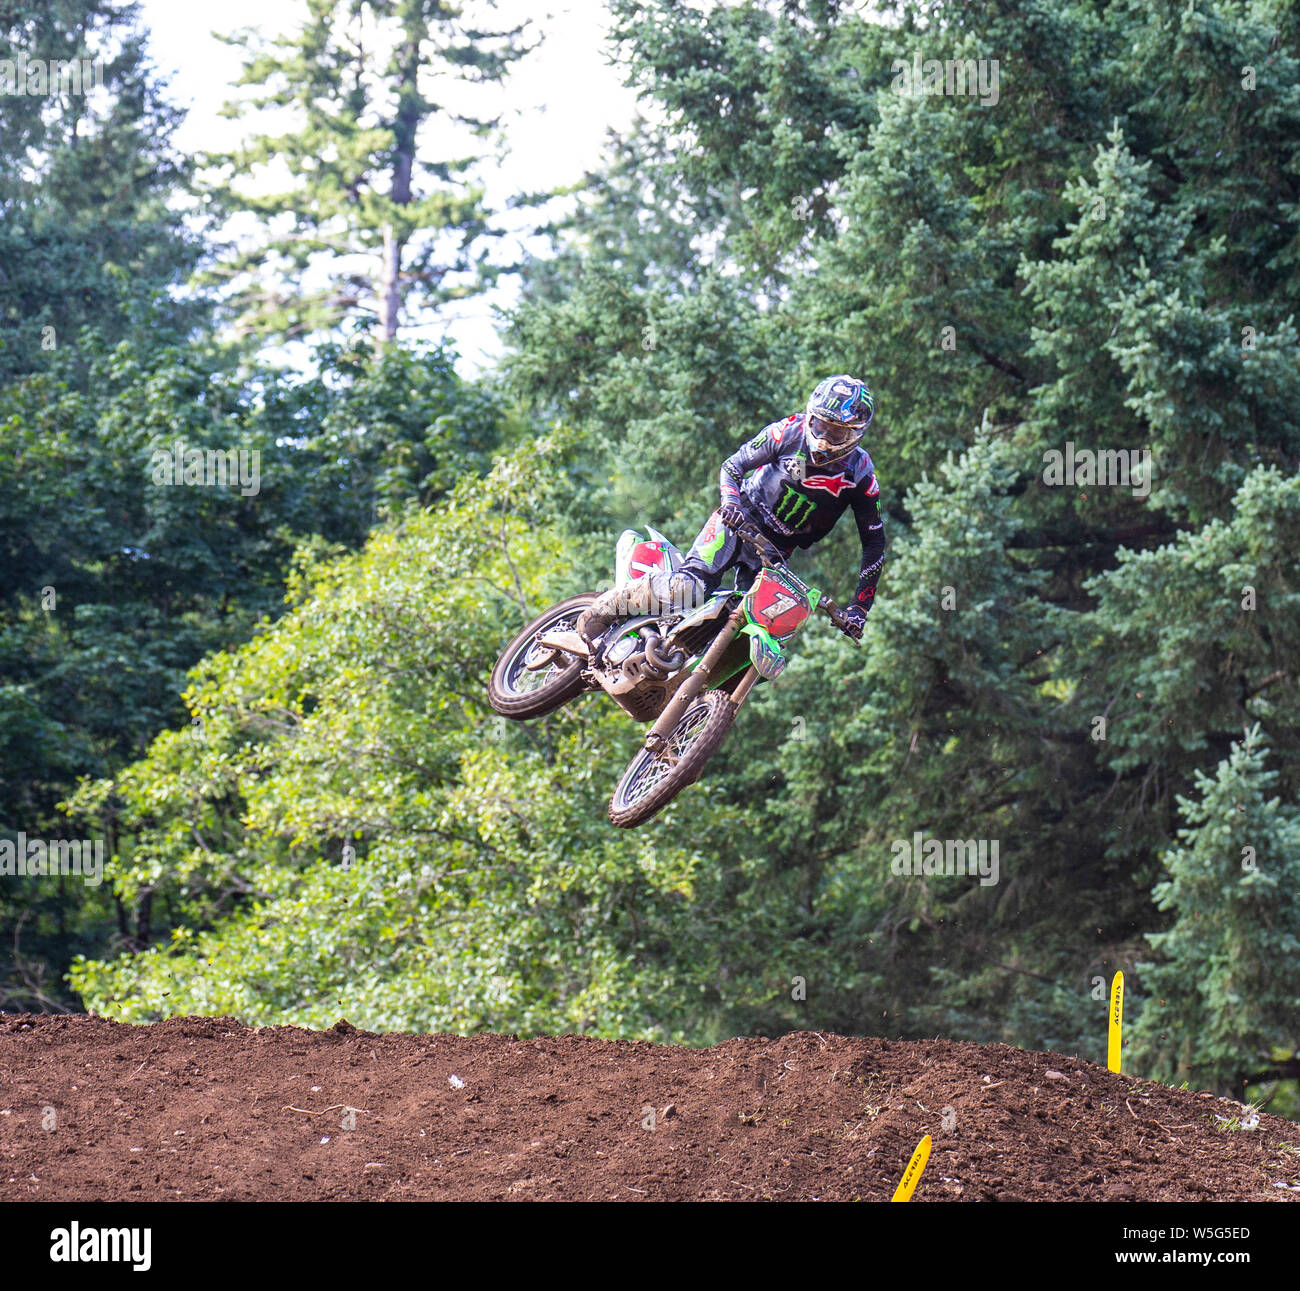 Washougal, WA USA. 27th July, 2019. # 1 Eli Tomac gets between section 21 and 22 during the Lucas Oil Pro Motocross Washougal National 450 class championship at Washougal MX park Washougal, WA Thurman James/CSM/Alamy Live News Stock Photo